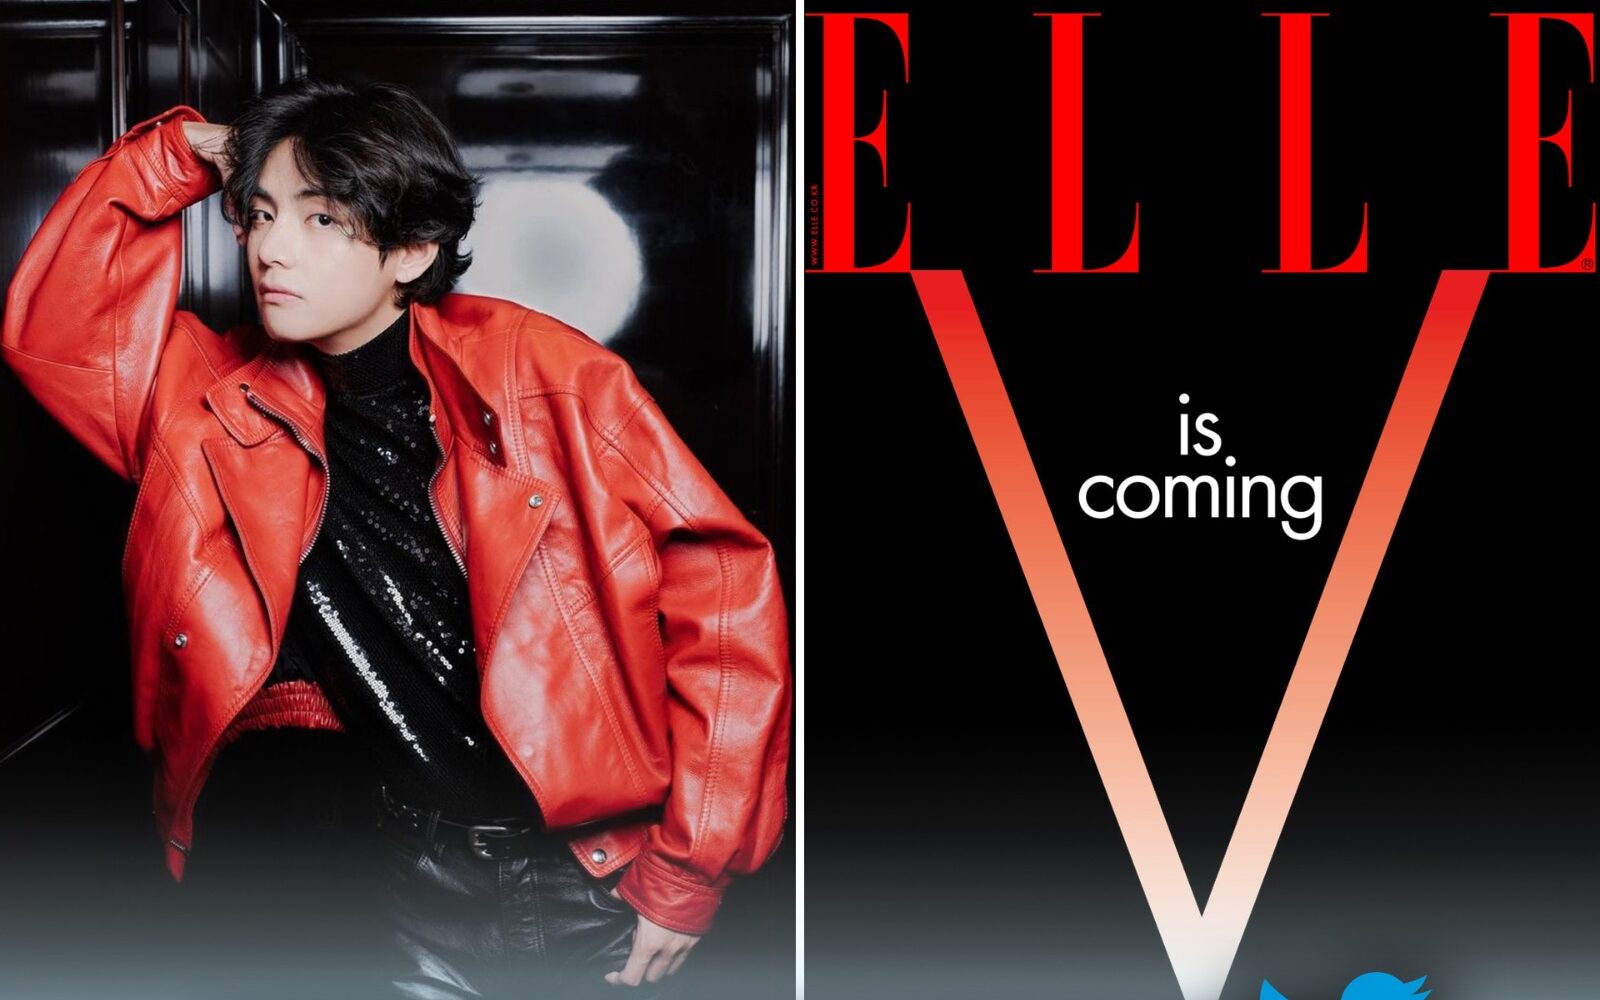 V (Kim Taehyung) is coming as the cover model for Elle Korea